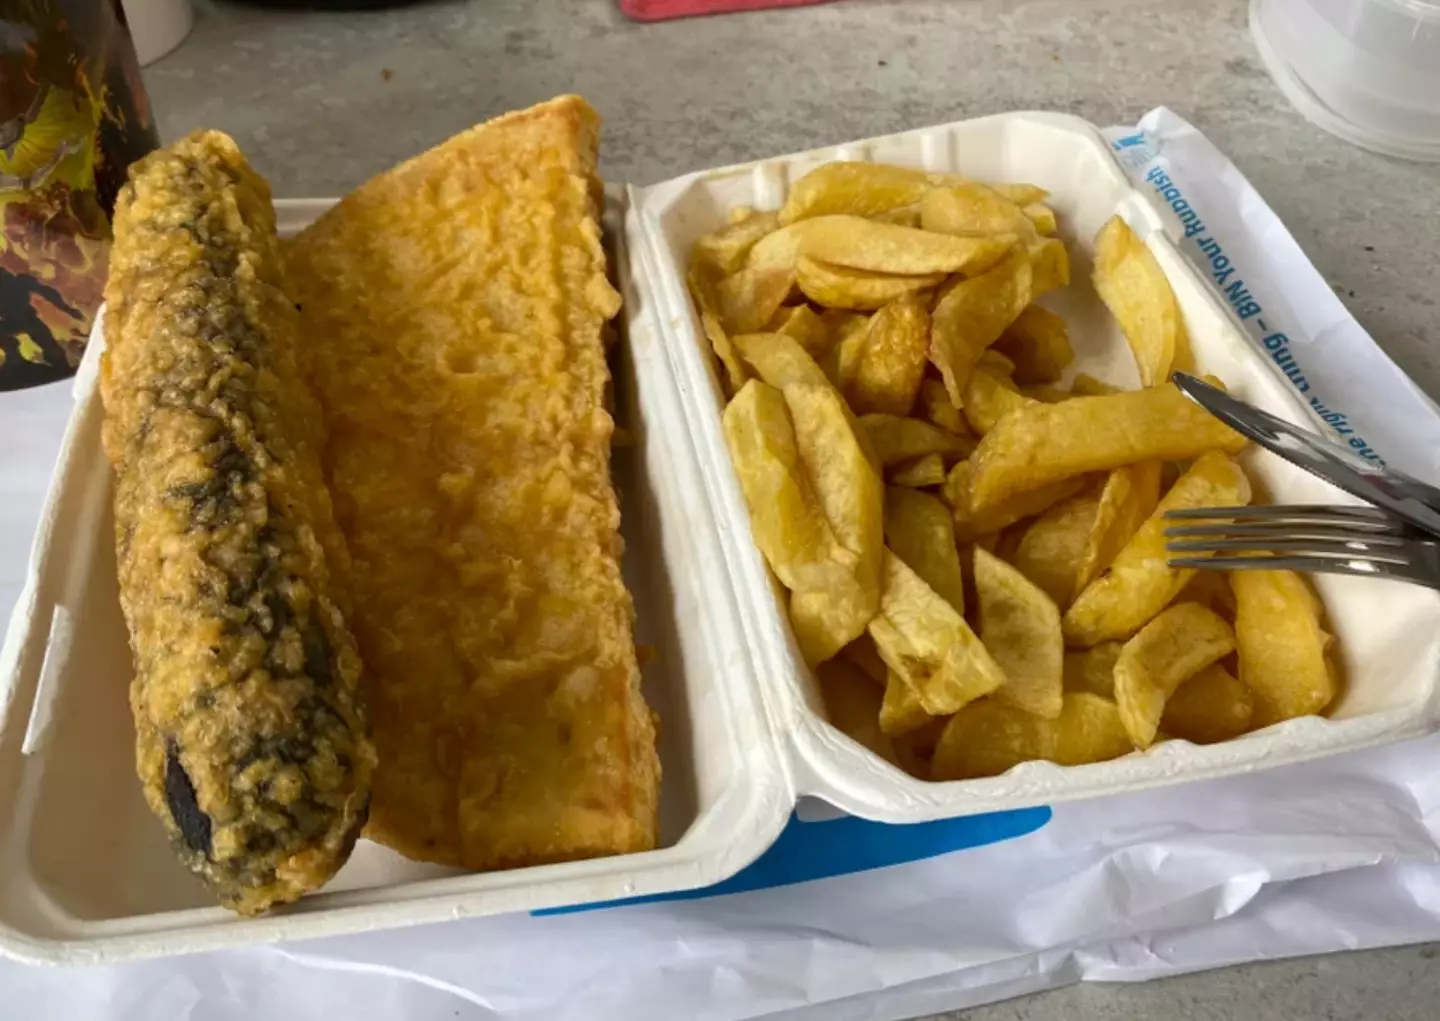 The order contained crunch pizza, black pudding and chips.